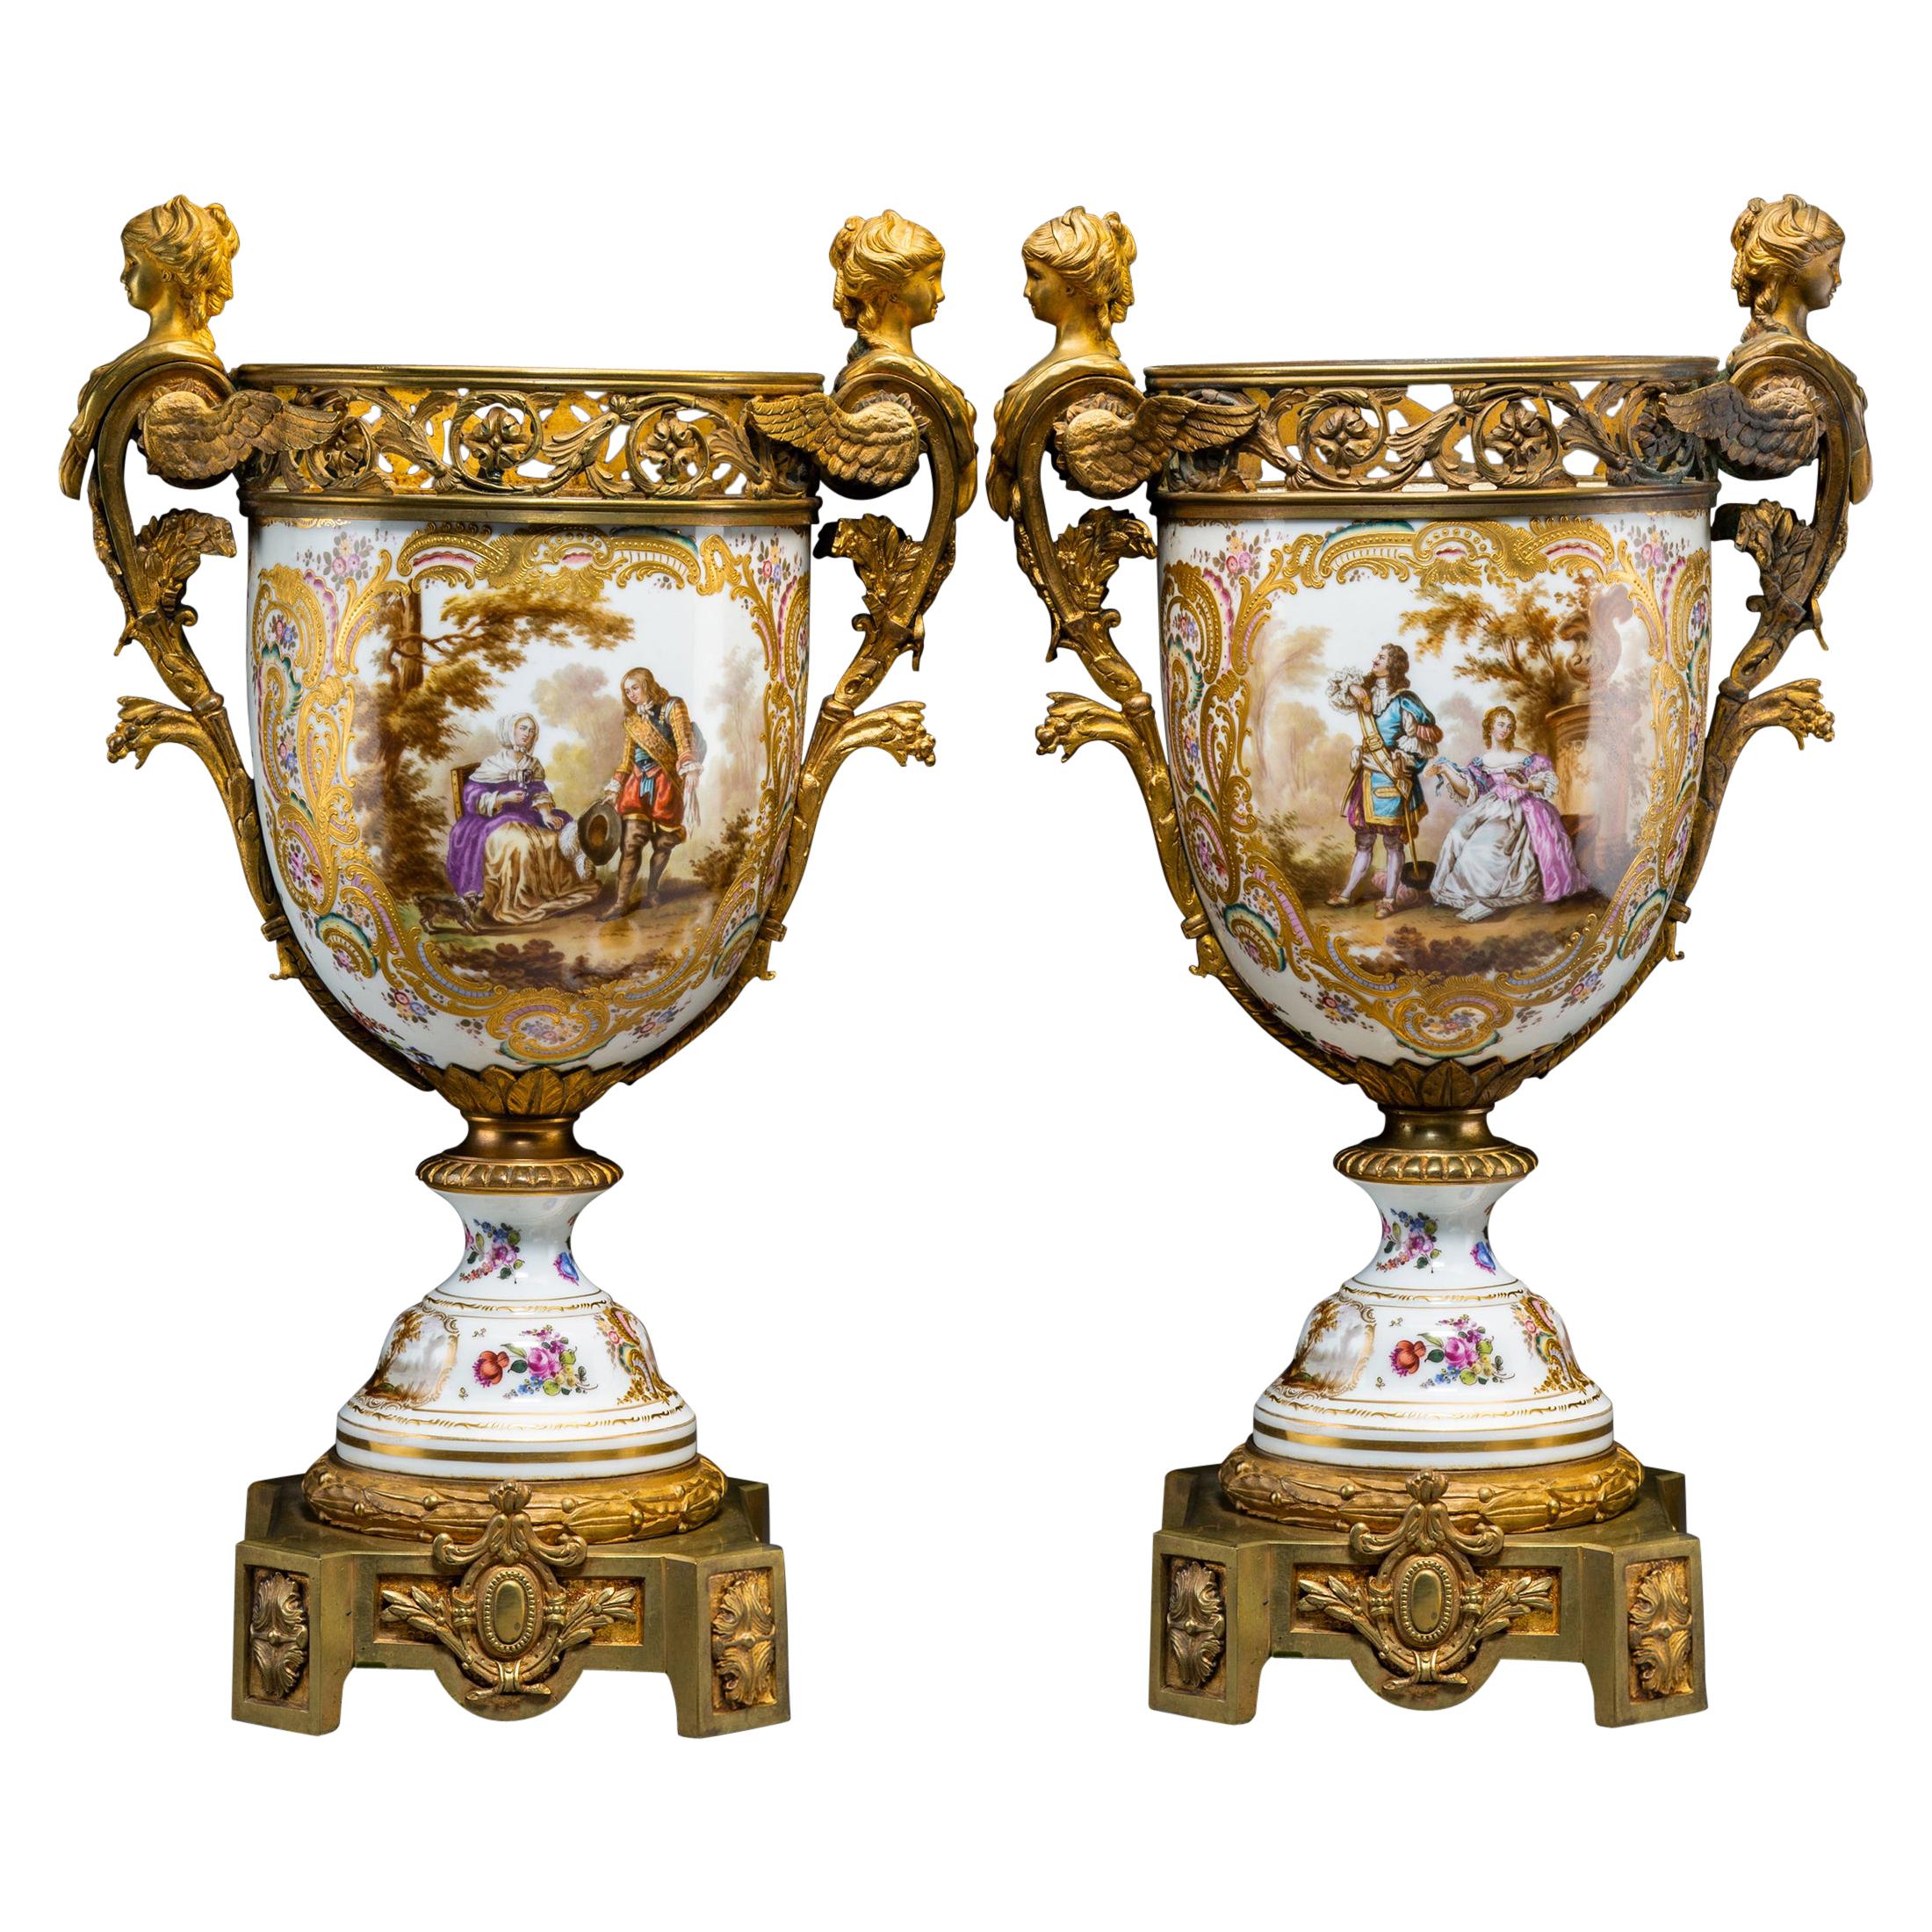 Early 20th Century Pair of Continental Gilt Bronze-Mounted Painted Porcelain Urn